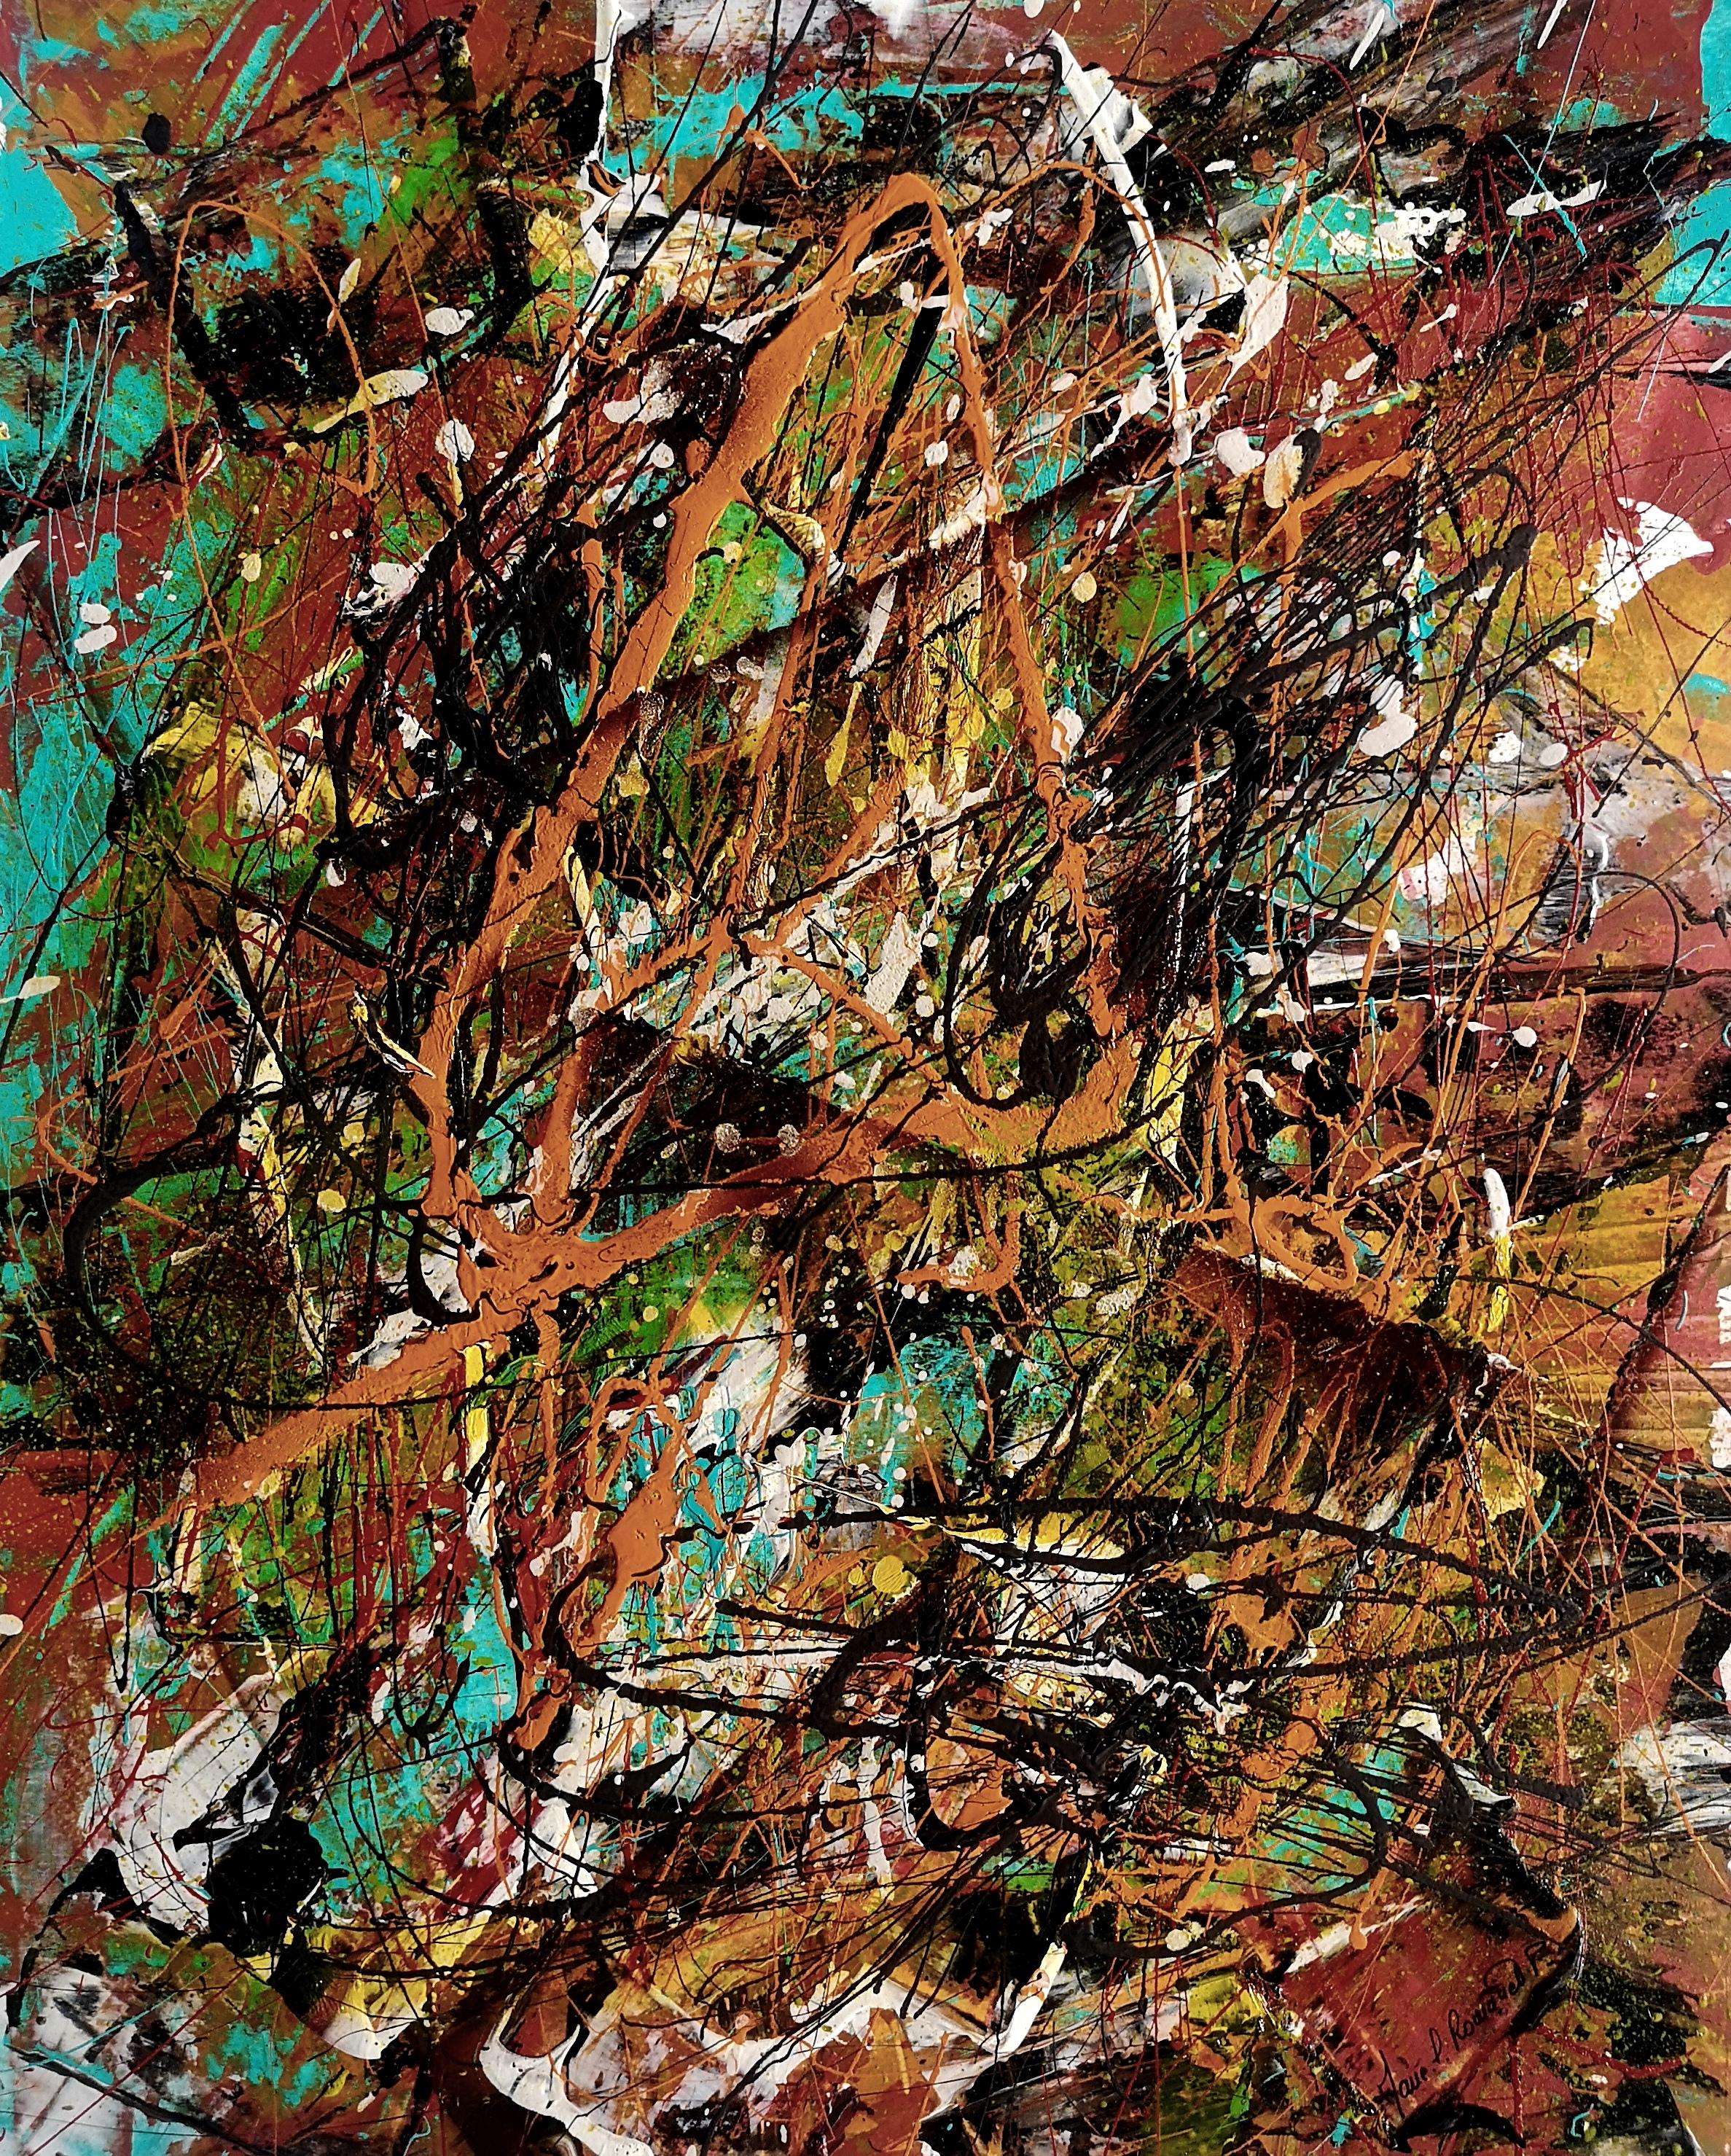 Marie-Laure Romanet Prin company Abstract Painting - "LE CYCLE DE LA VIE" Pollock style